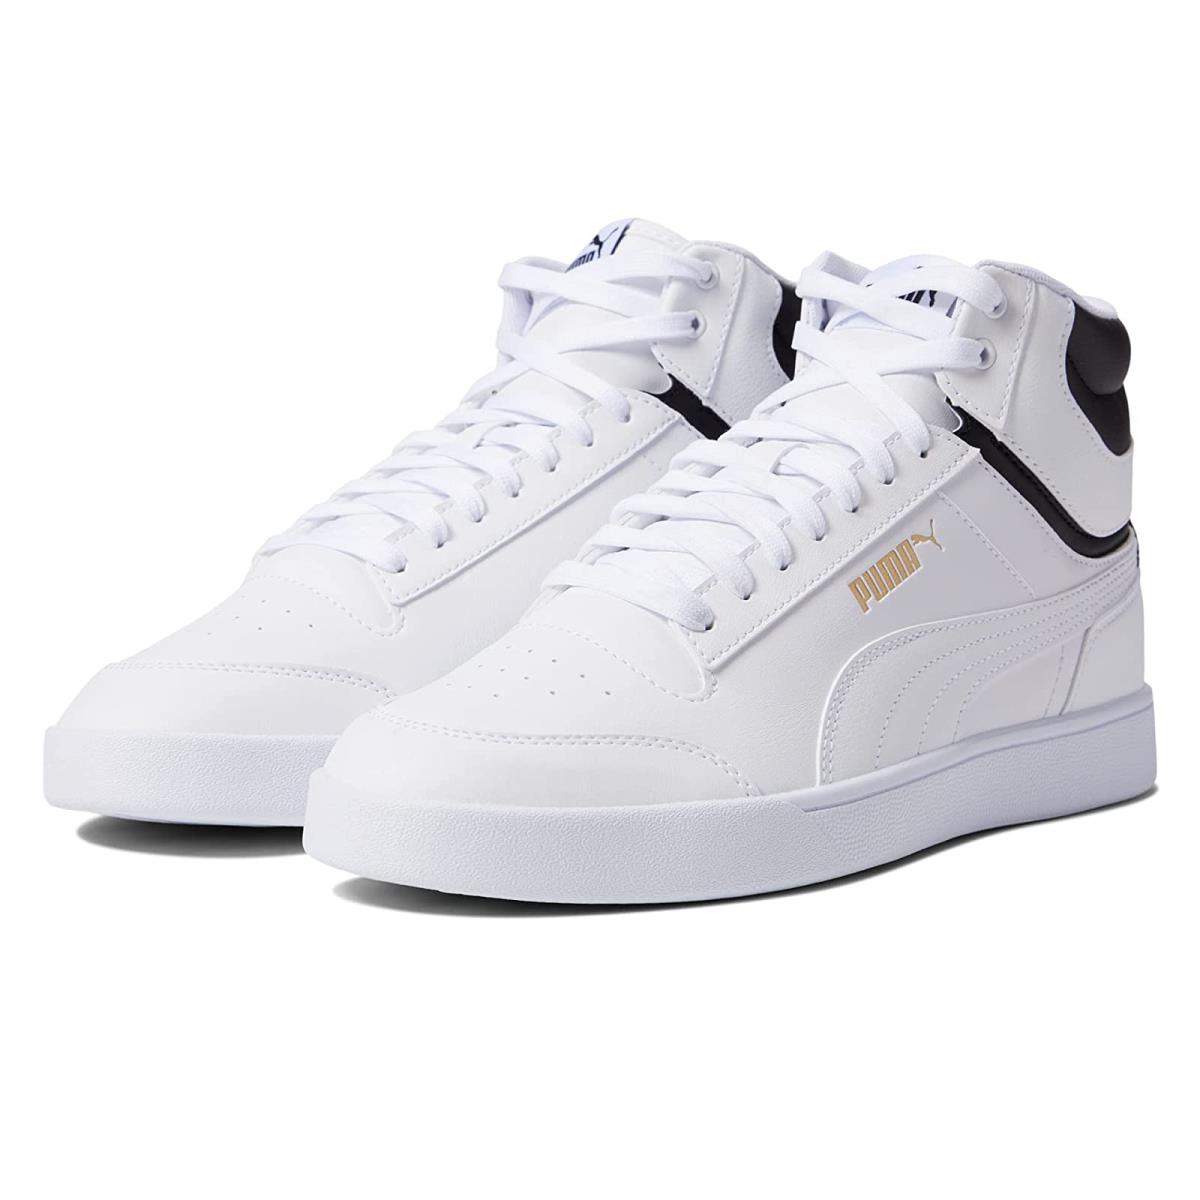 Man`s Sneakers Athletic Shoes Puma Shuffle Mid Puma White/Puma White/Puma Black/Puma Team Gold